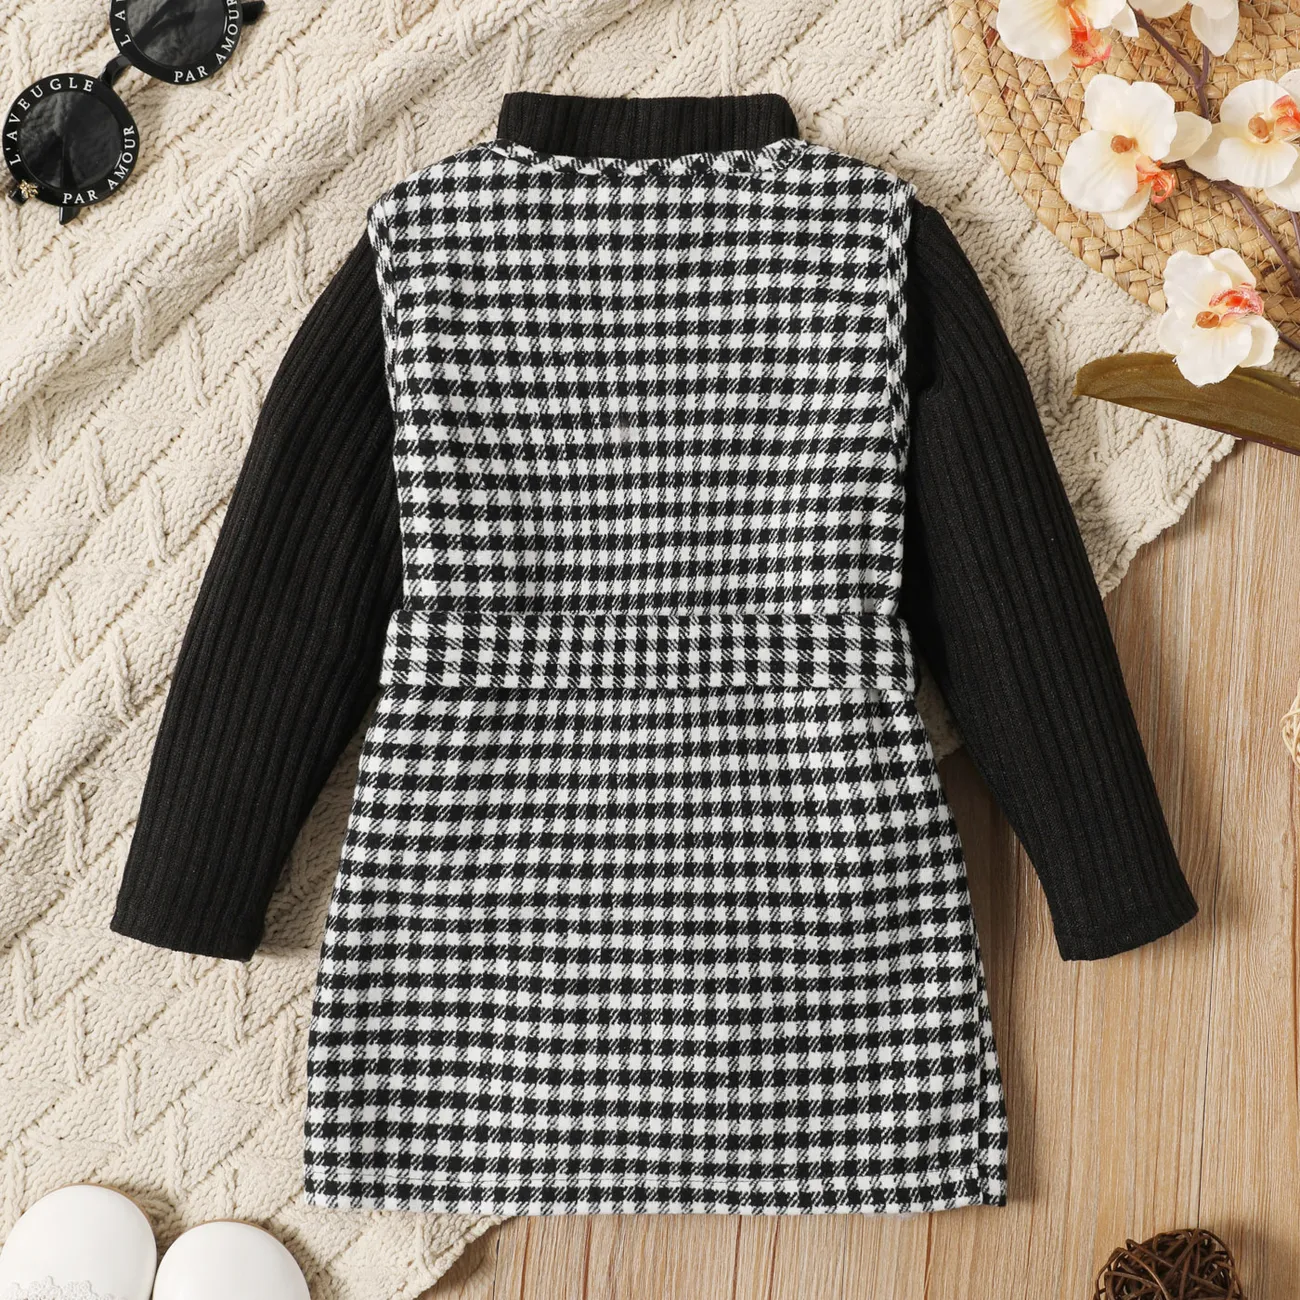 2-piece Toddler Girl Turtleneck Long-sleeve Ribbed Black Sweater and Belted Plaid Tweed Overall Dress Set Black/White big image 1